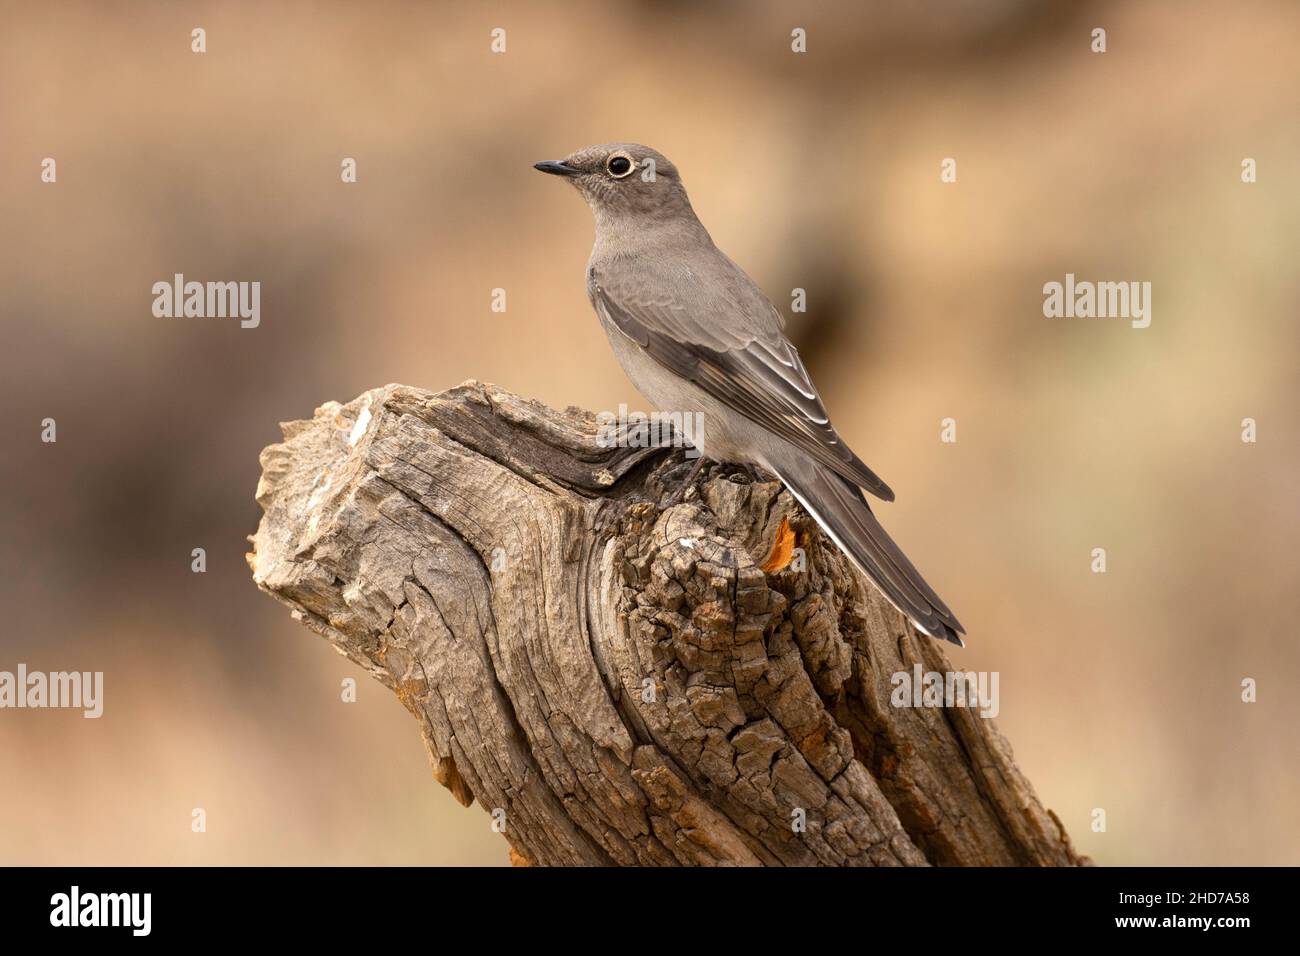 Townsend's Solitaire (Myadestes townsendi), Cabin Lake Viewing Blind, Deschutes National Forest, Oregon. Stock Photo